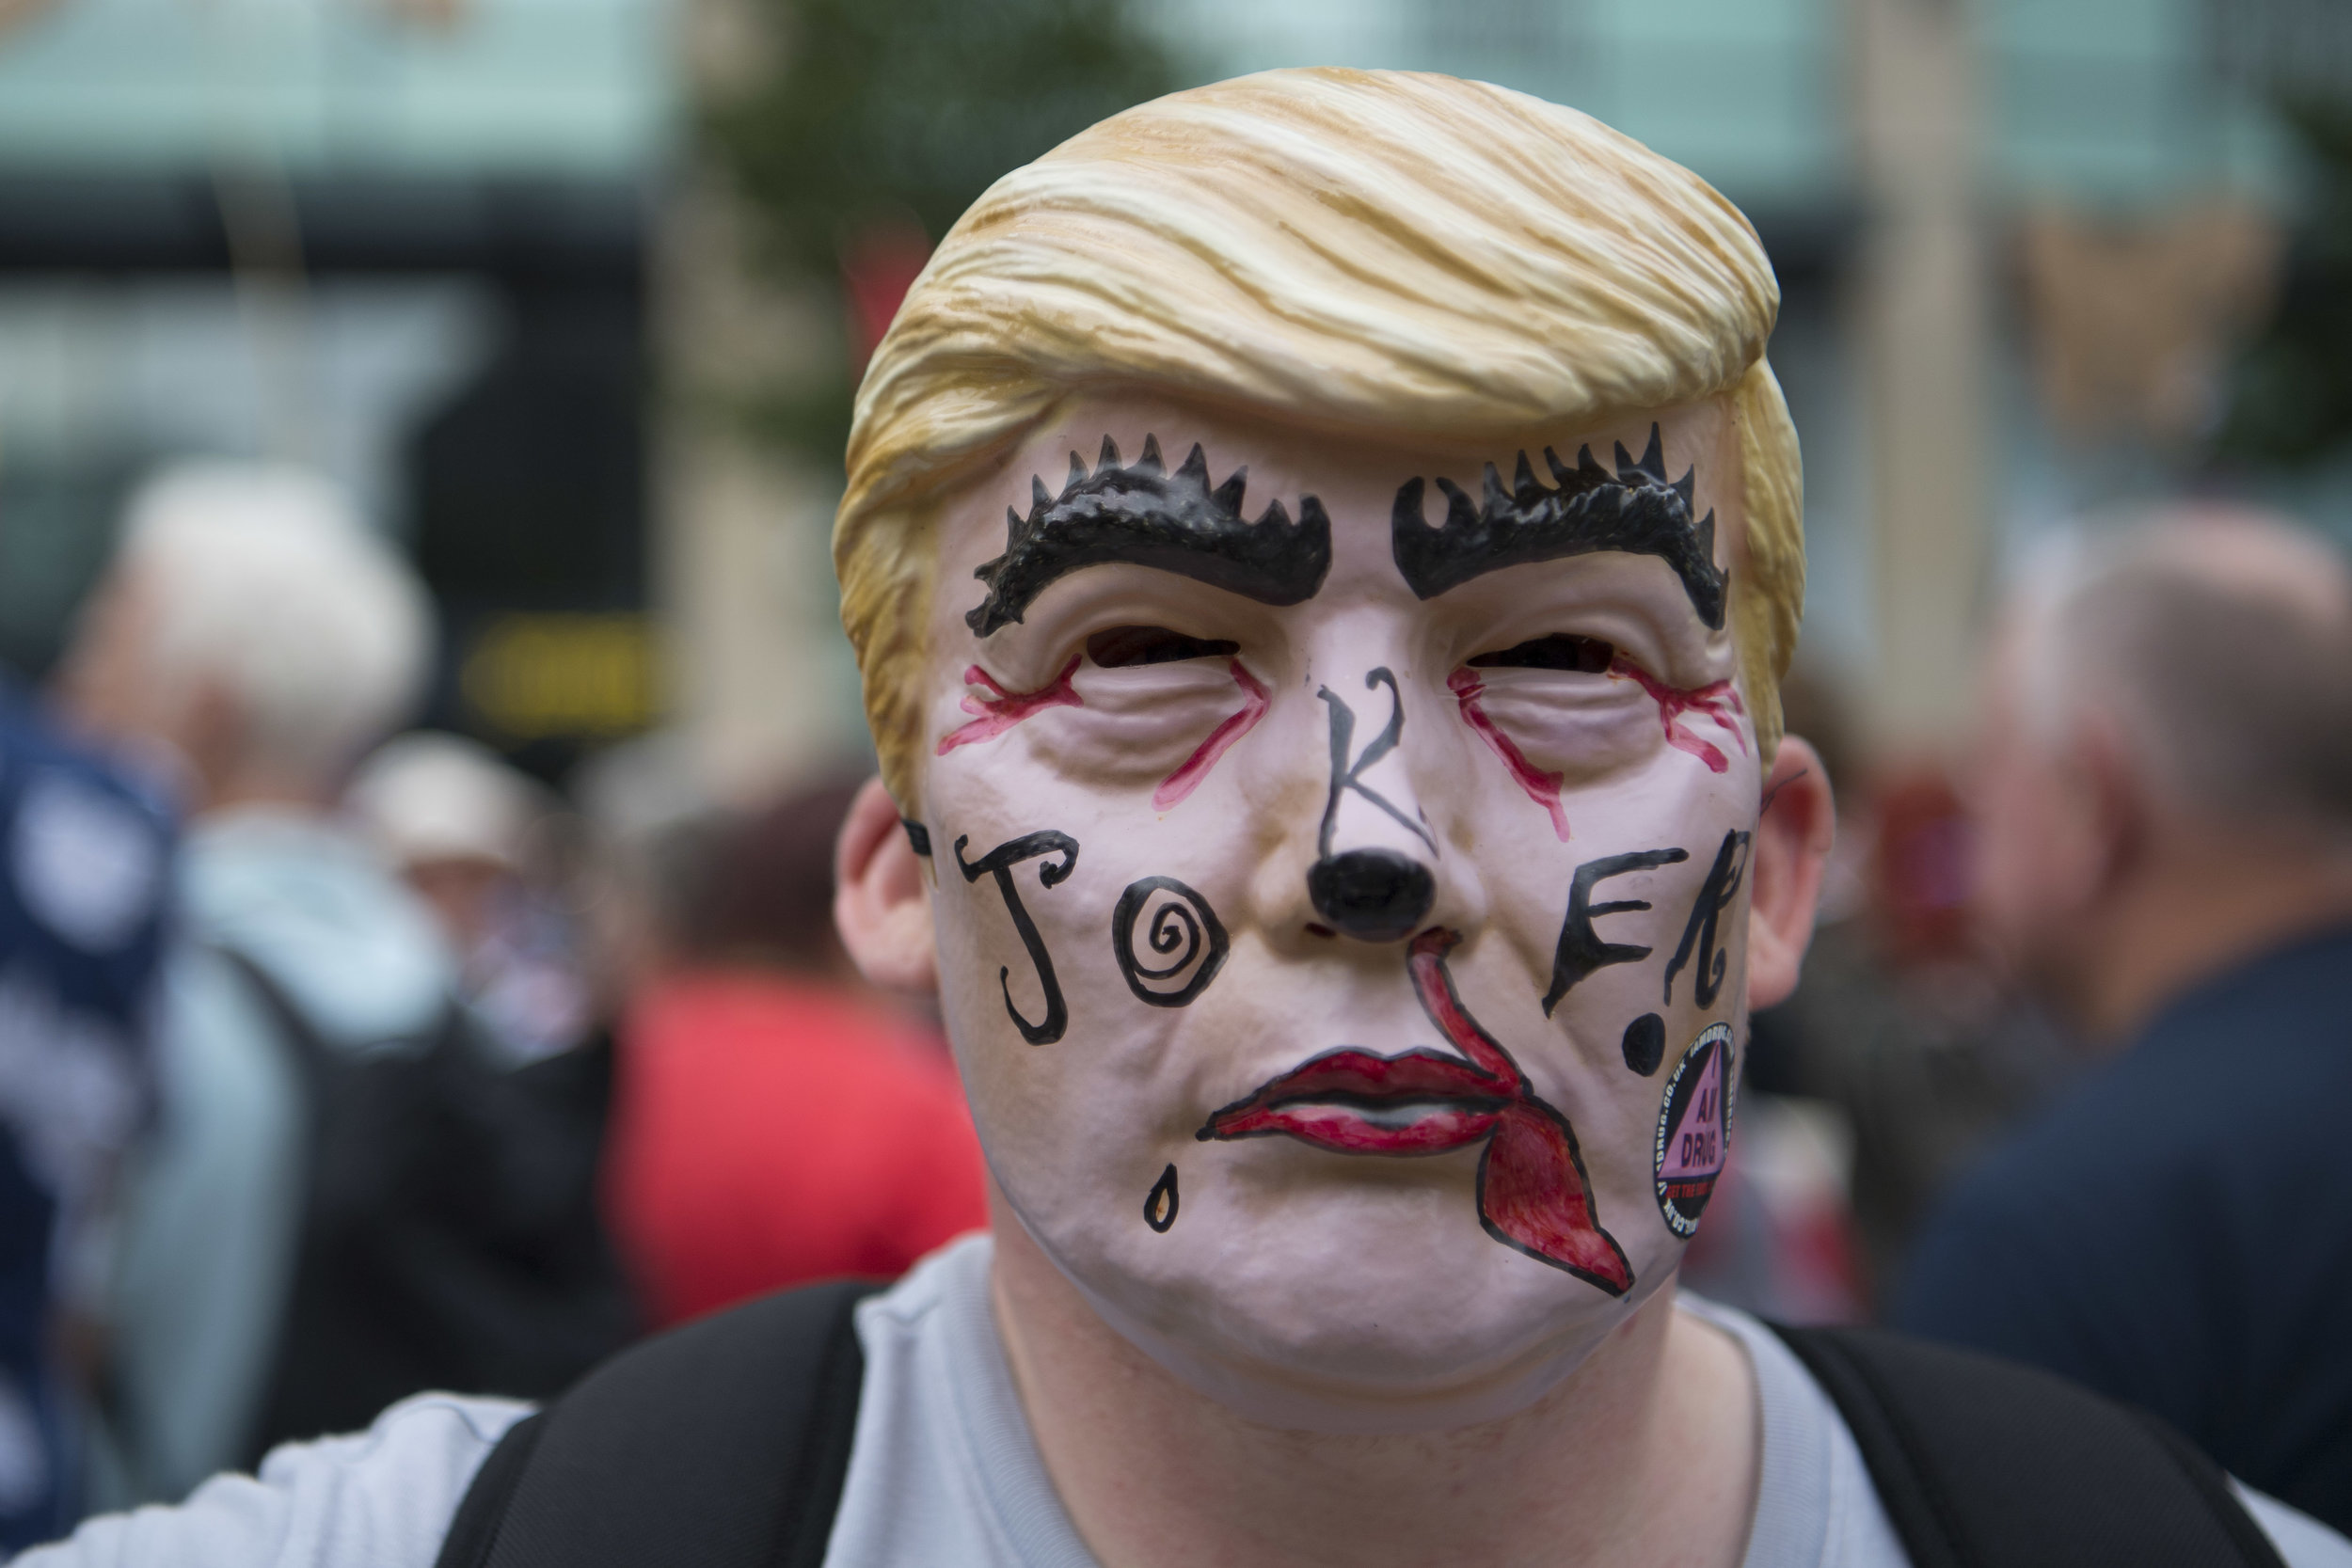  CARDIFF, UNITED KINGDOM - JULY 12: A man is seeing wearing a Donald Trump mask as protestors gather outside Cardiff Library on the Hayes in Cardiff to protest against a visit by the President of the United States Donald Trump on July 12, 2018 in Car